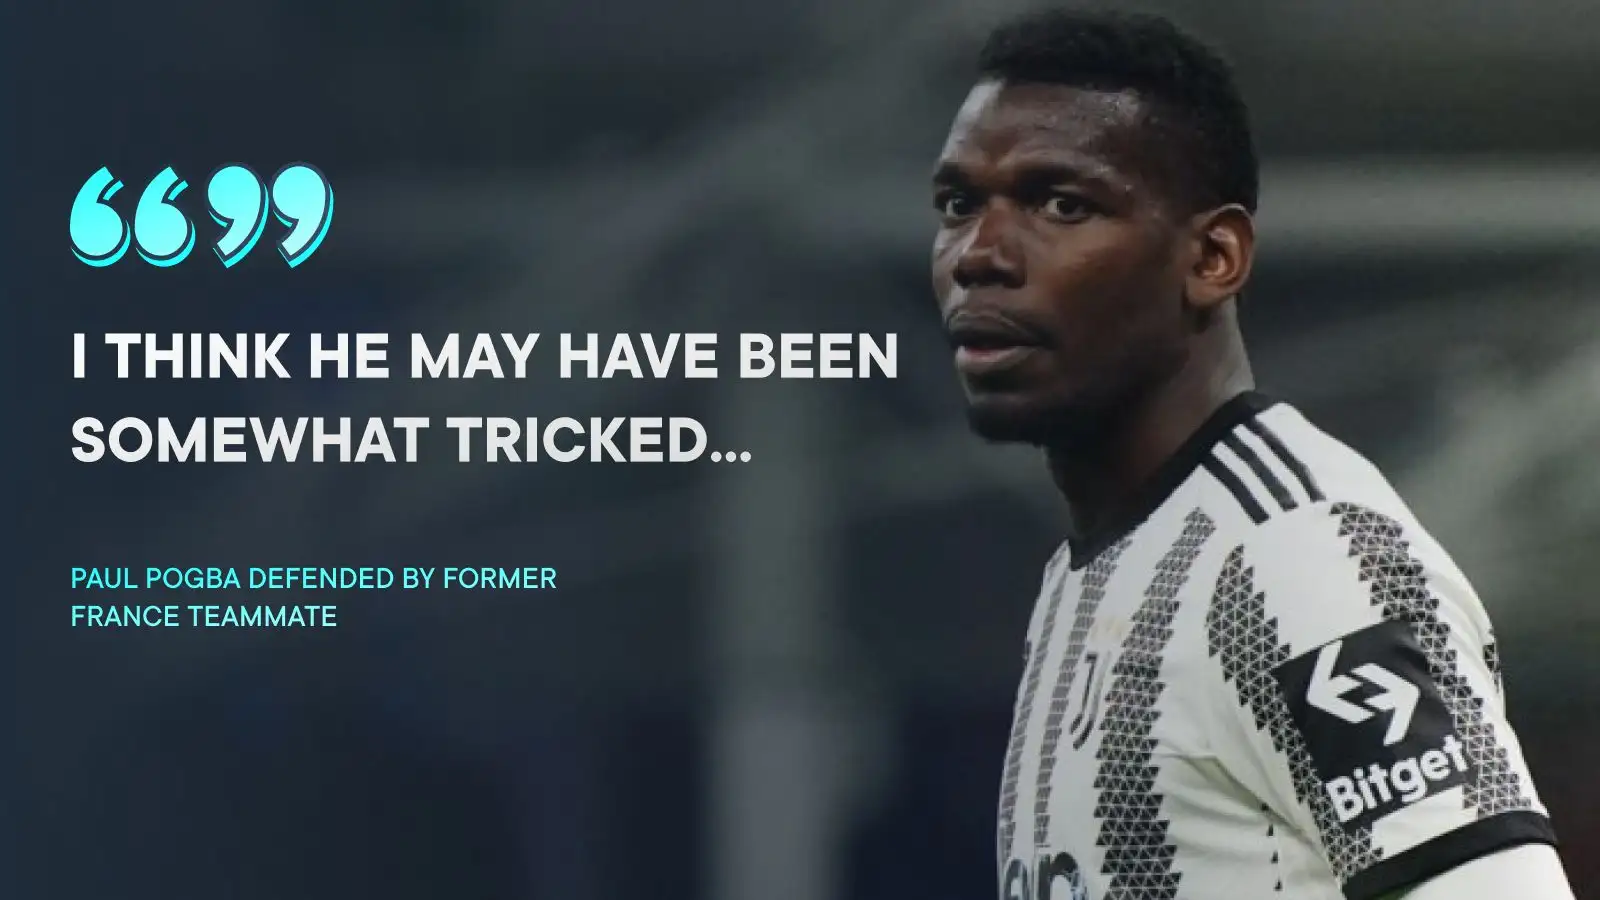 Ex-Man Utd star Pogba defended by ex-France teammates amid claim he was ‘tricked’ into doping